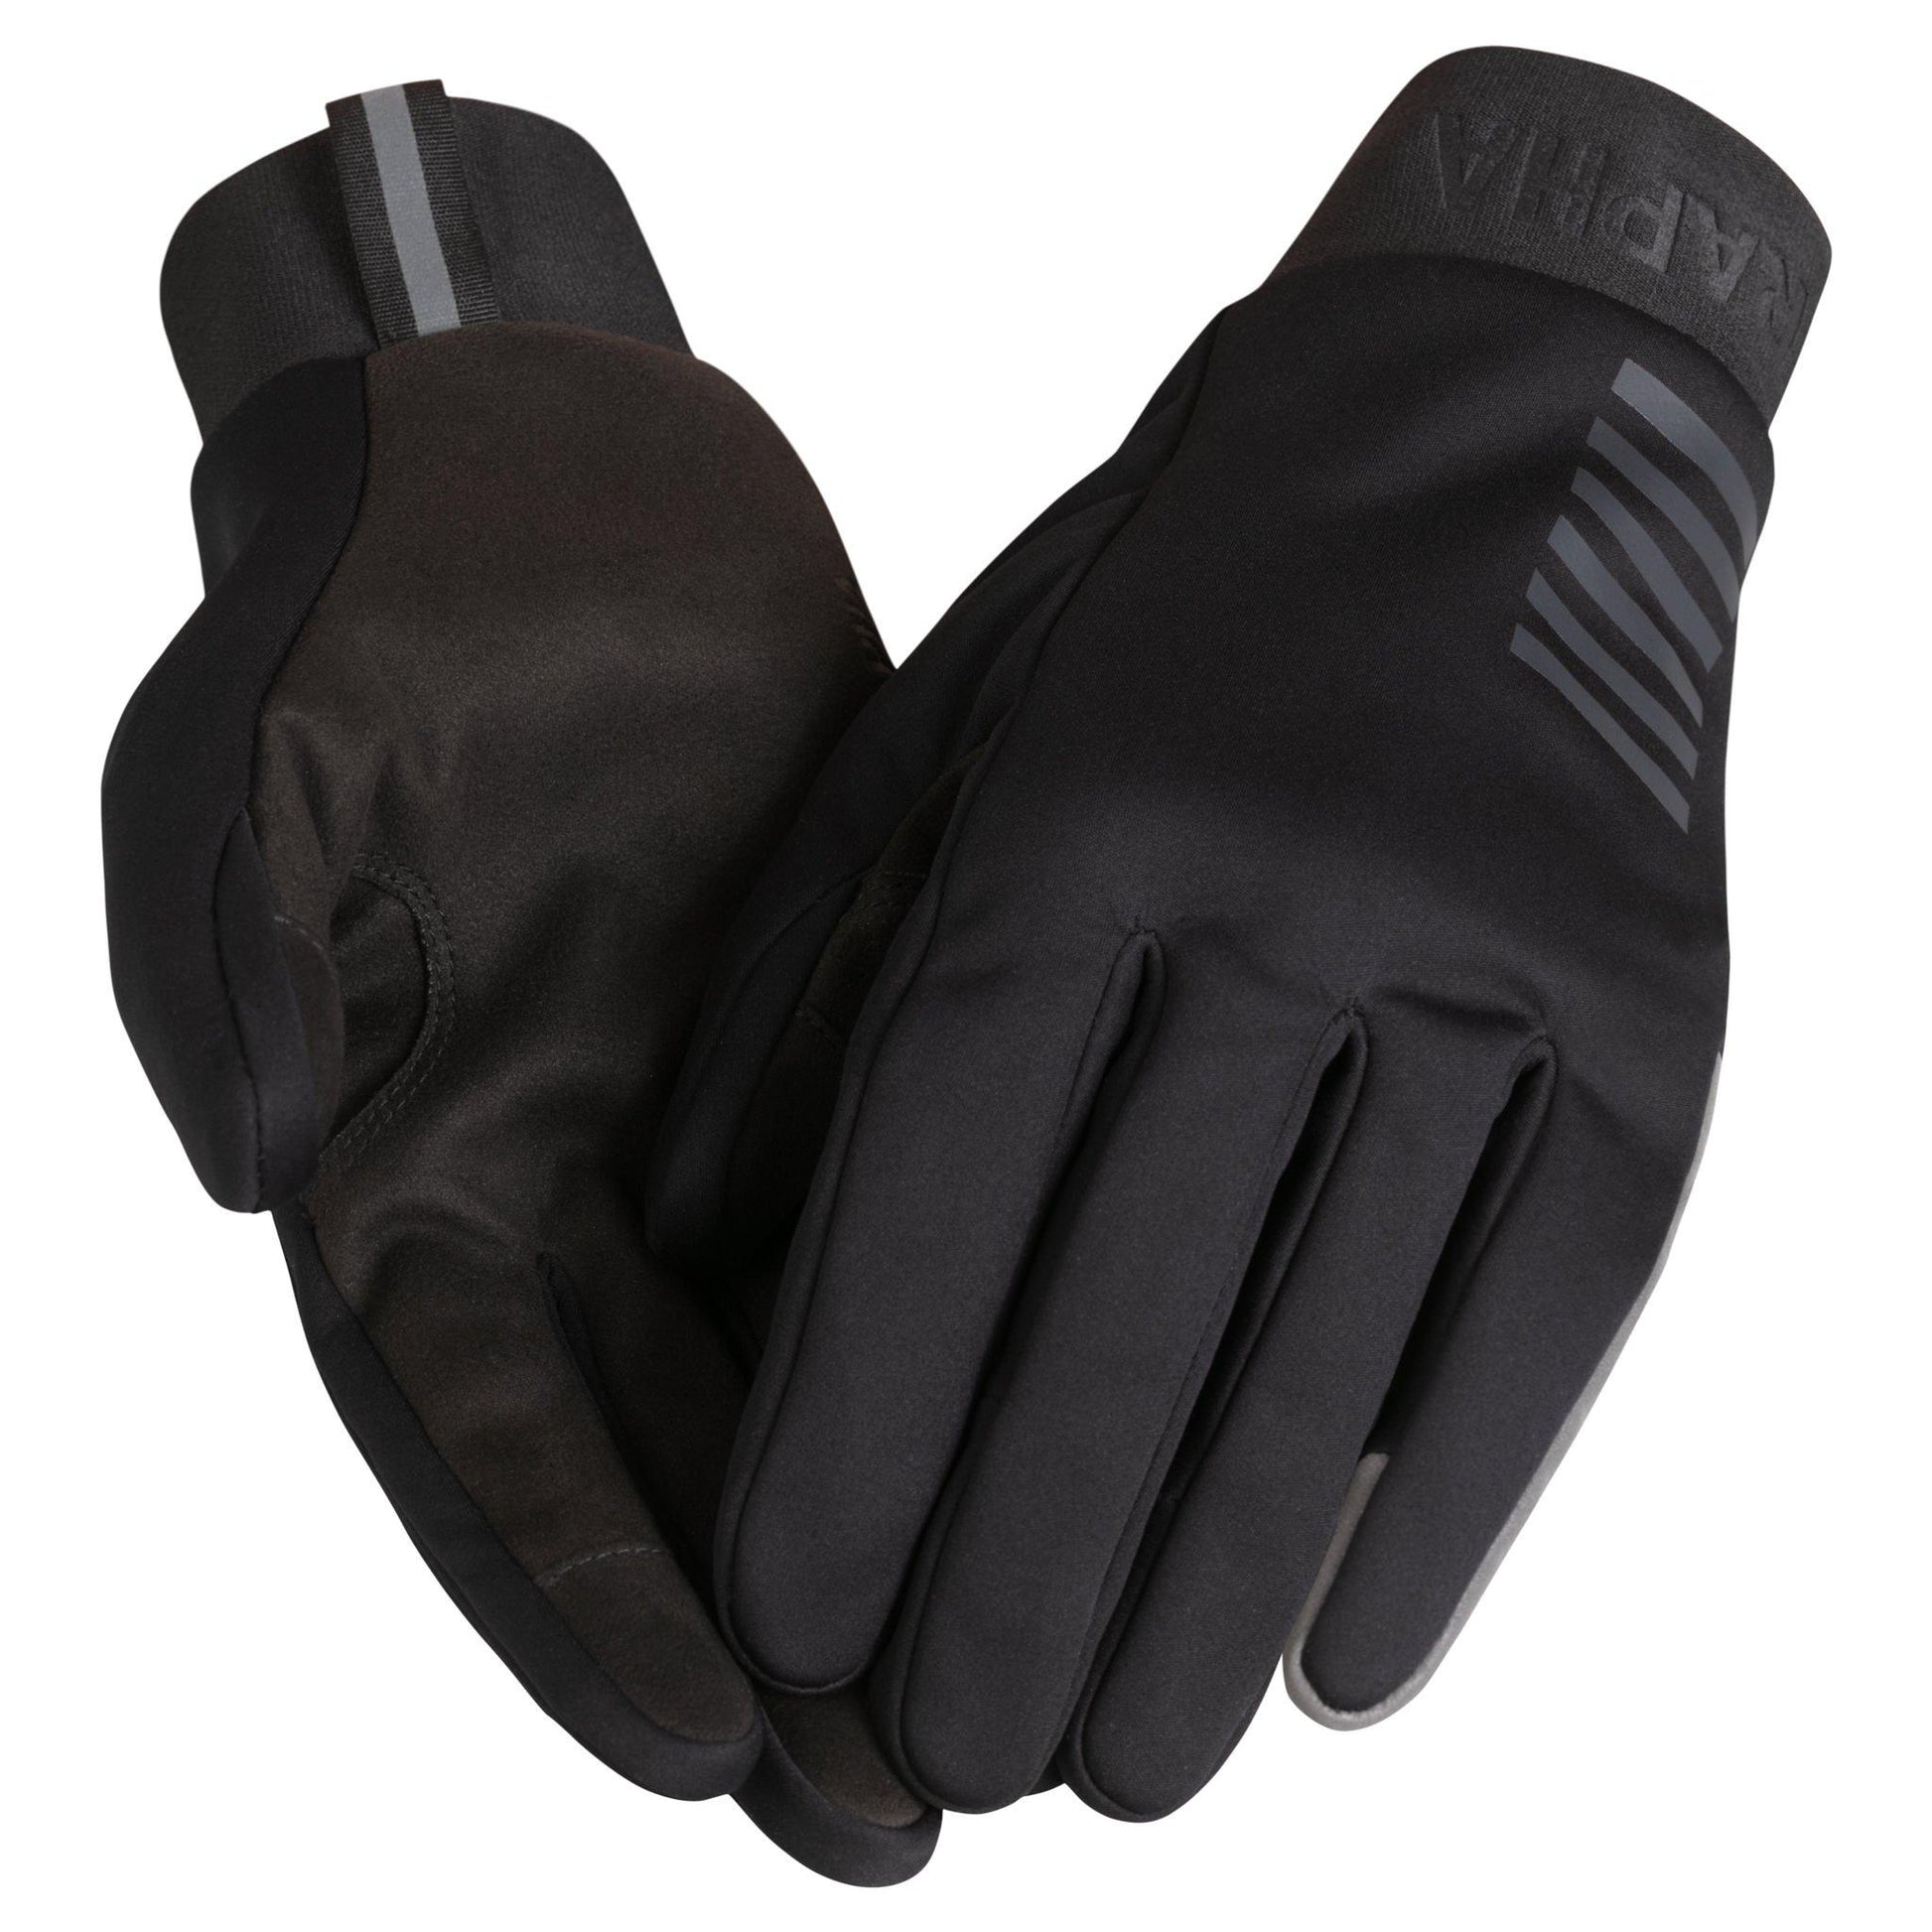 Rapha Unisex Pro Team Winter Gloves - Black buy online at Woolys Wheels Sydney with free delivery